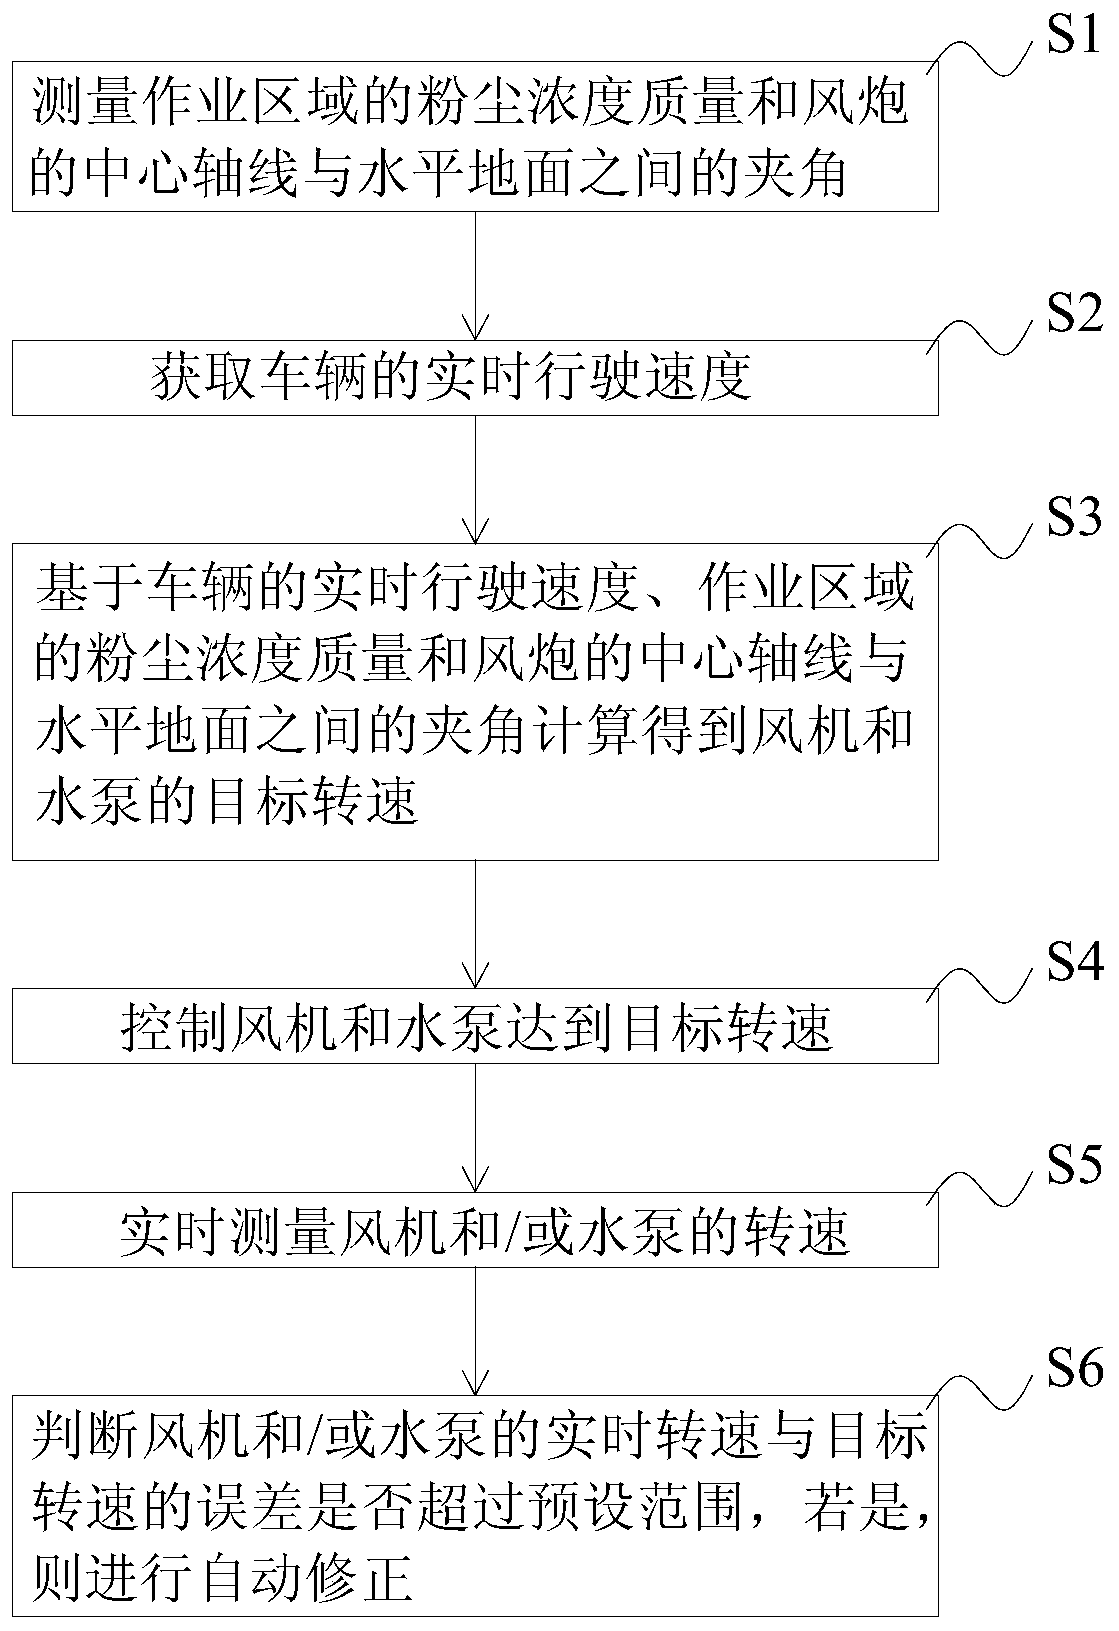 Intelligent spraying control system and method and dust suppression vehicle